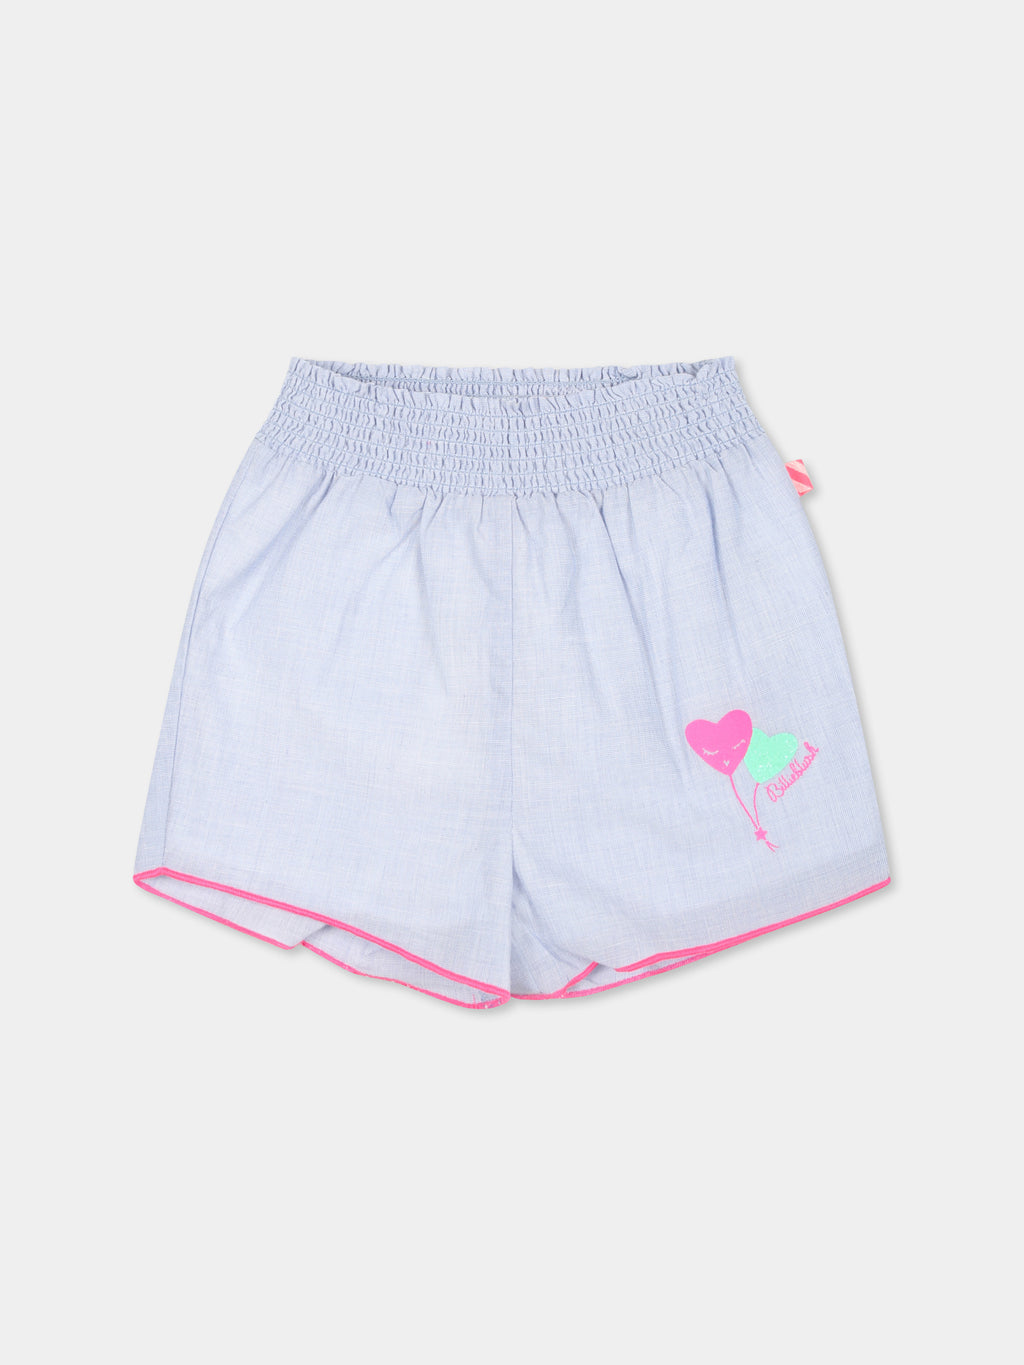 Light blue shorts for baby girl with hearts